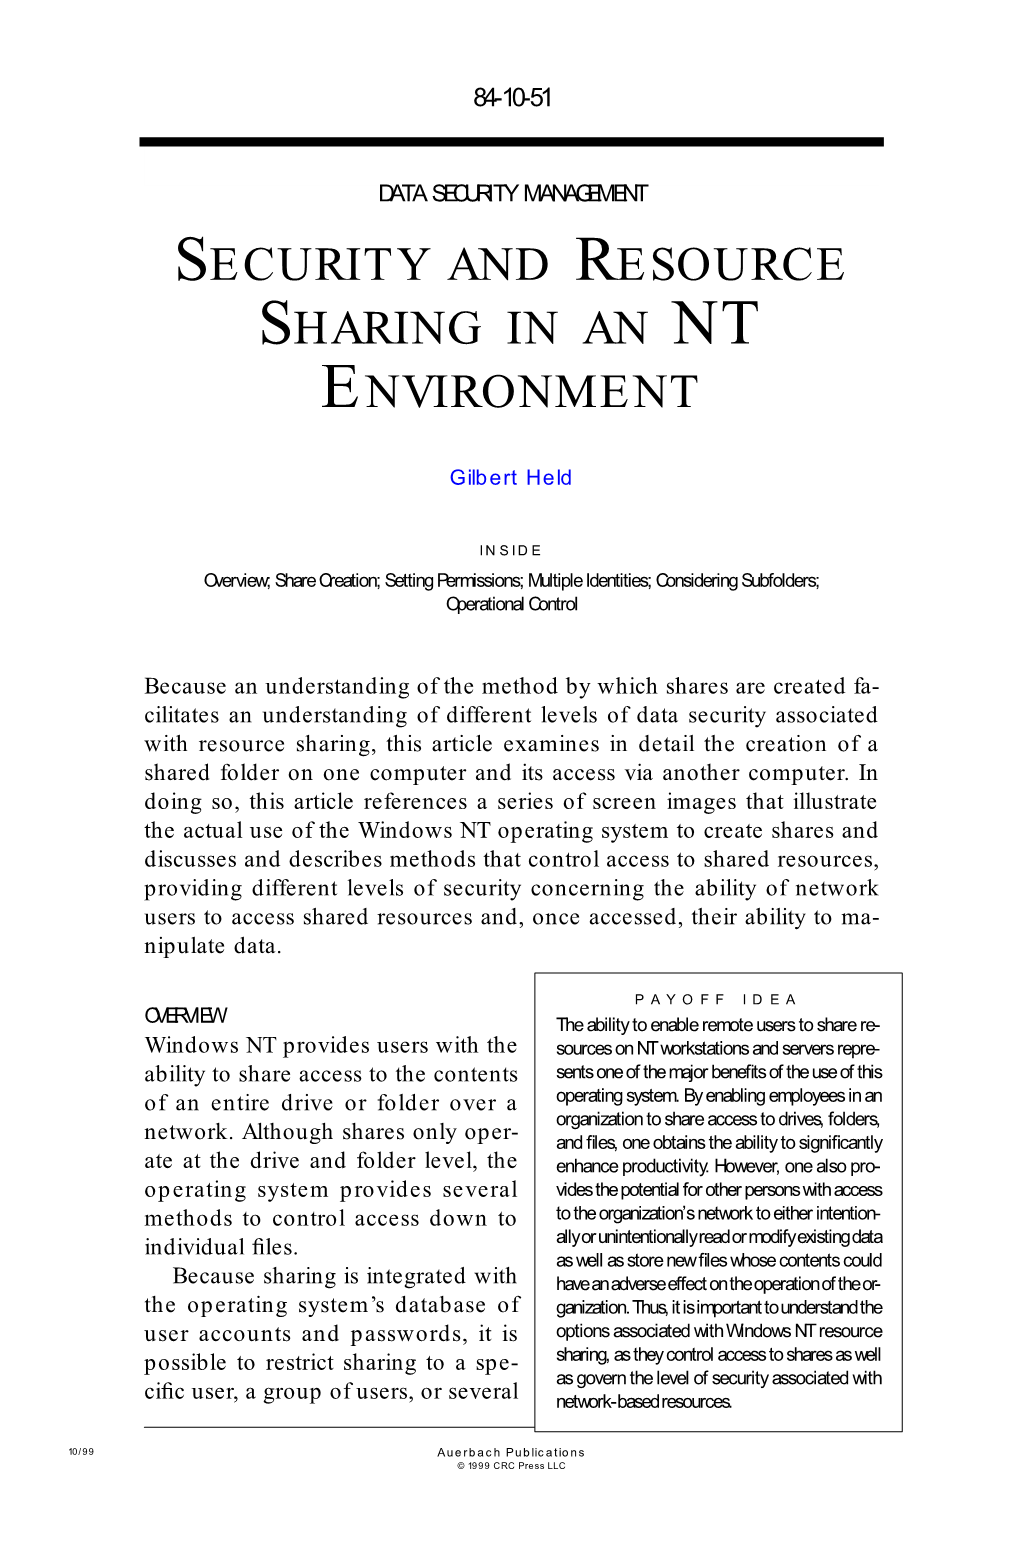 Security and Resource Sharing in an Nt Environment